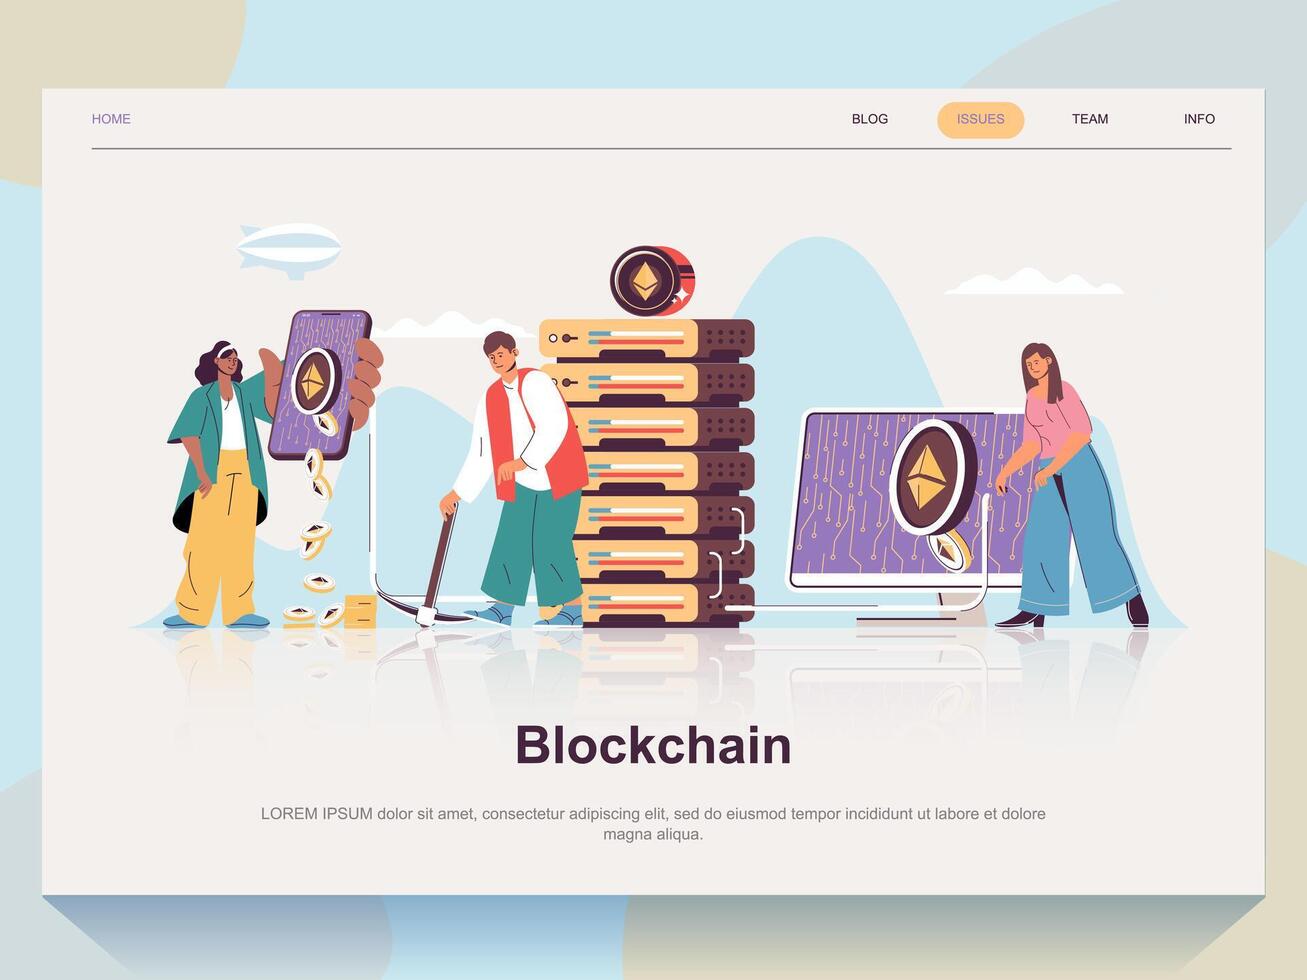 Blockchain web concept for landing page in flat design. Man and woman mining cryptocurrencies at farm, making transaction, earning money. Vector illustration with people scene for website homepage